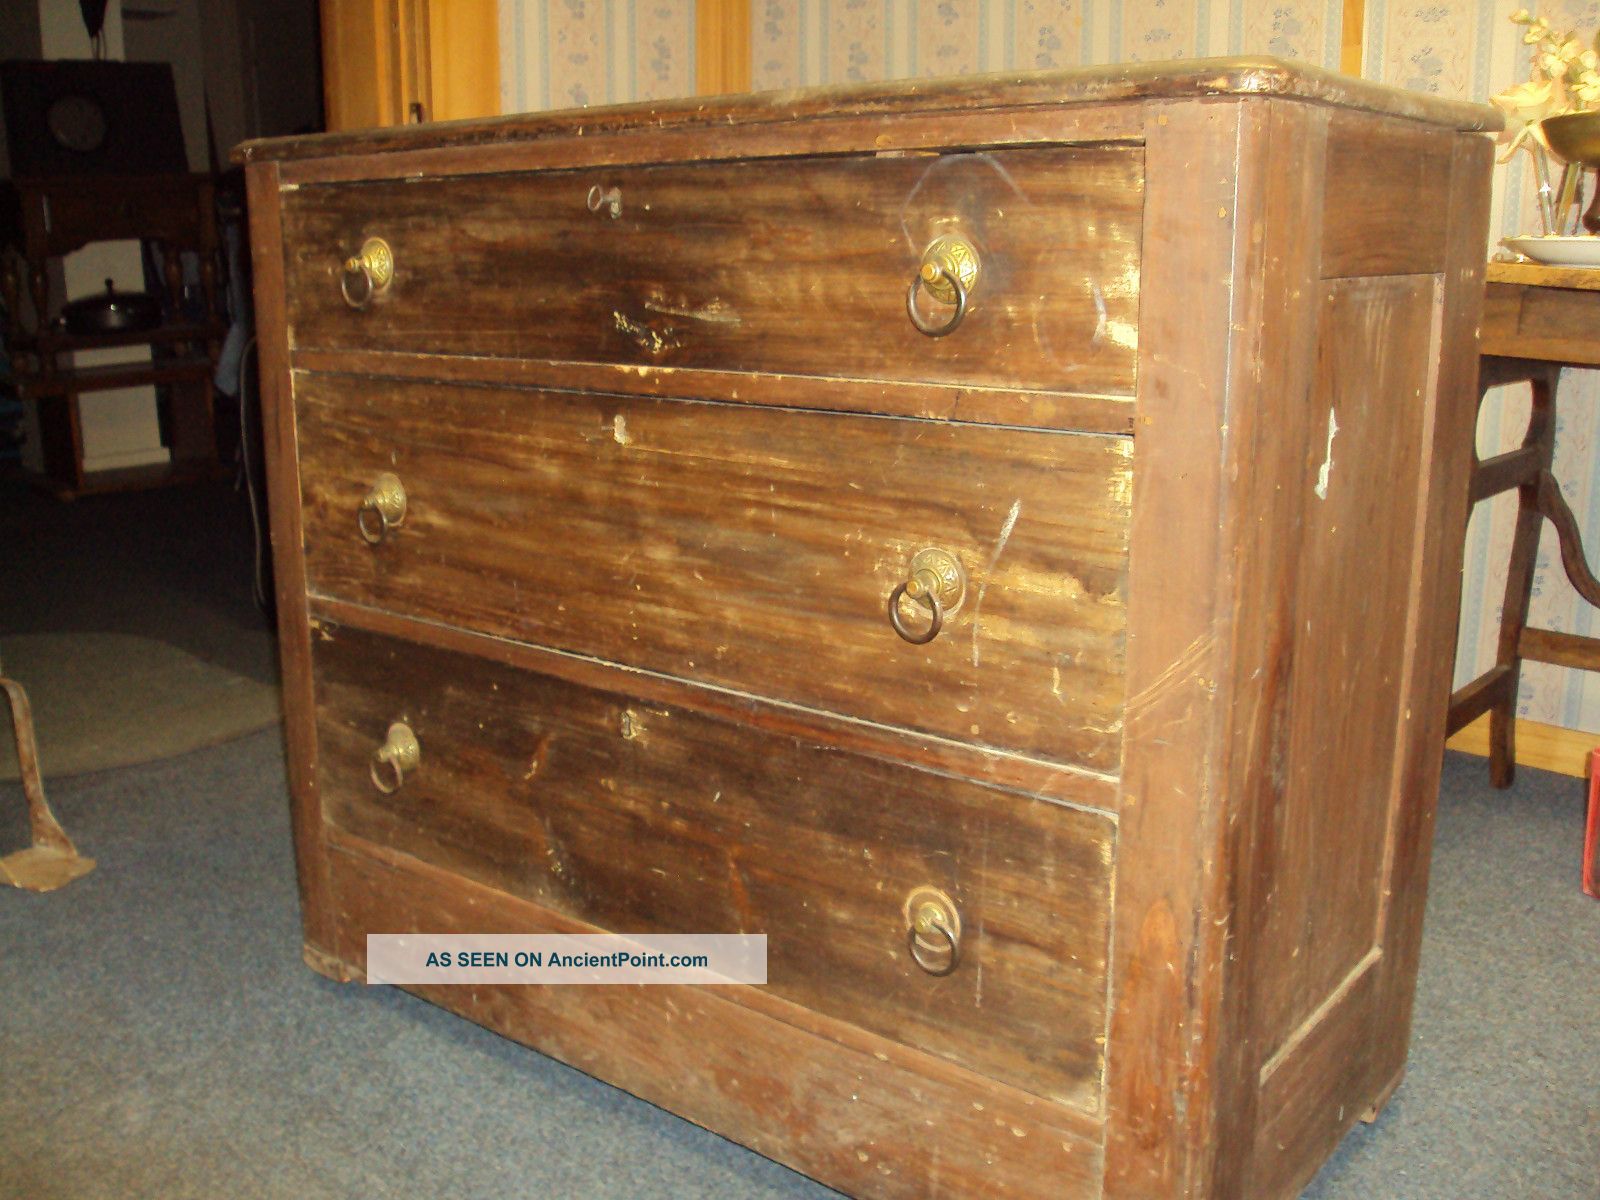 This Is A Hand Made 3 Drawer Bureau From The Late 1700s To Early 1800s With Key 1800-1899 photo